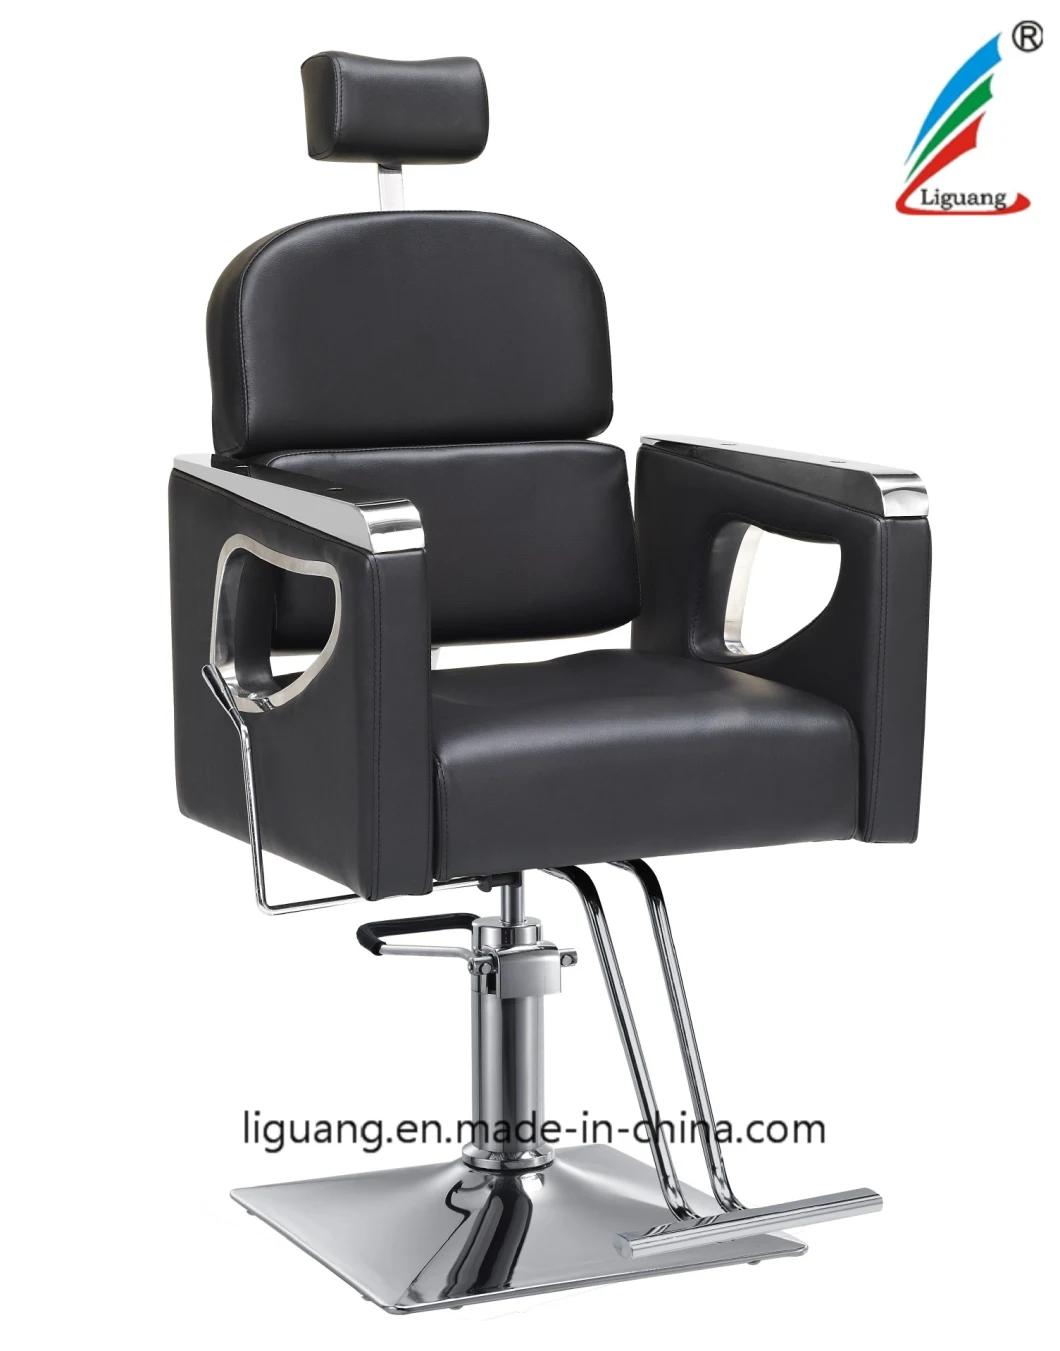 Export Strong Salon Furniture Professional Wholesale Barber Chair